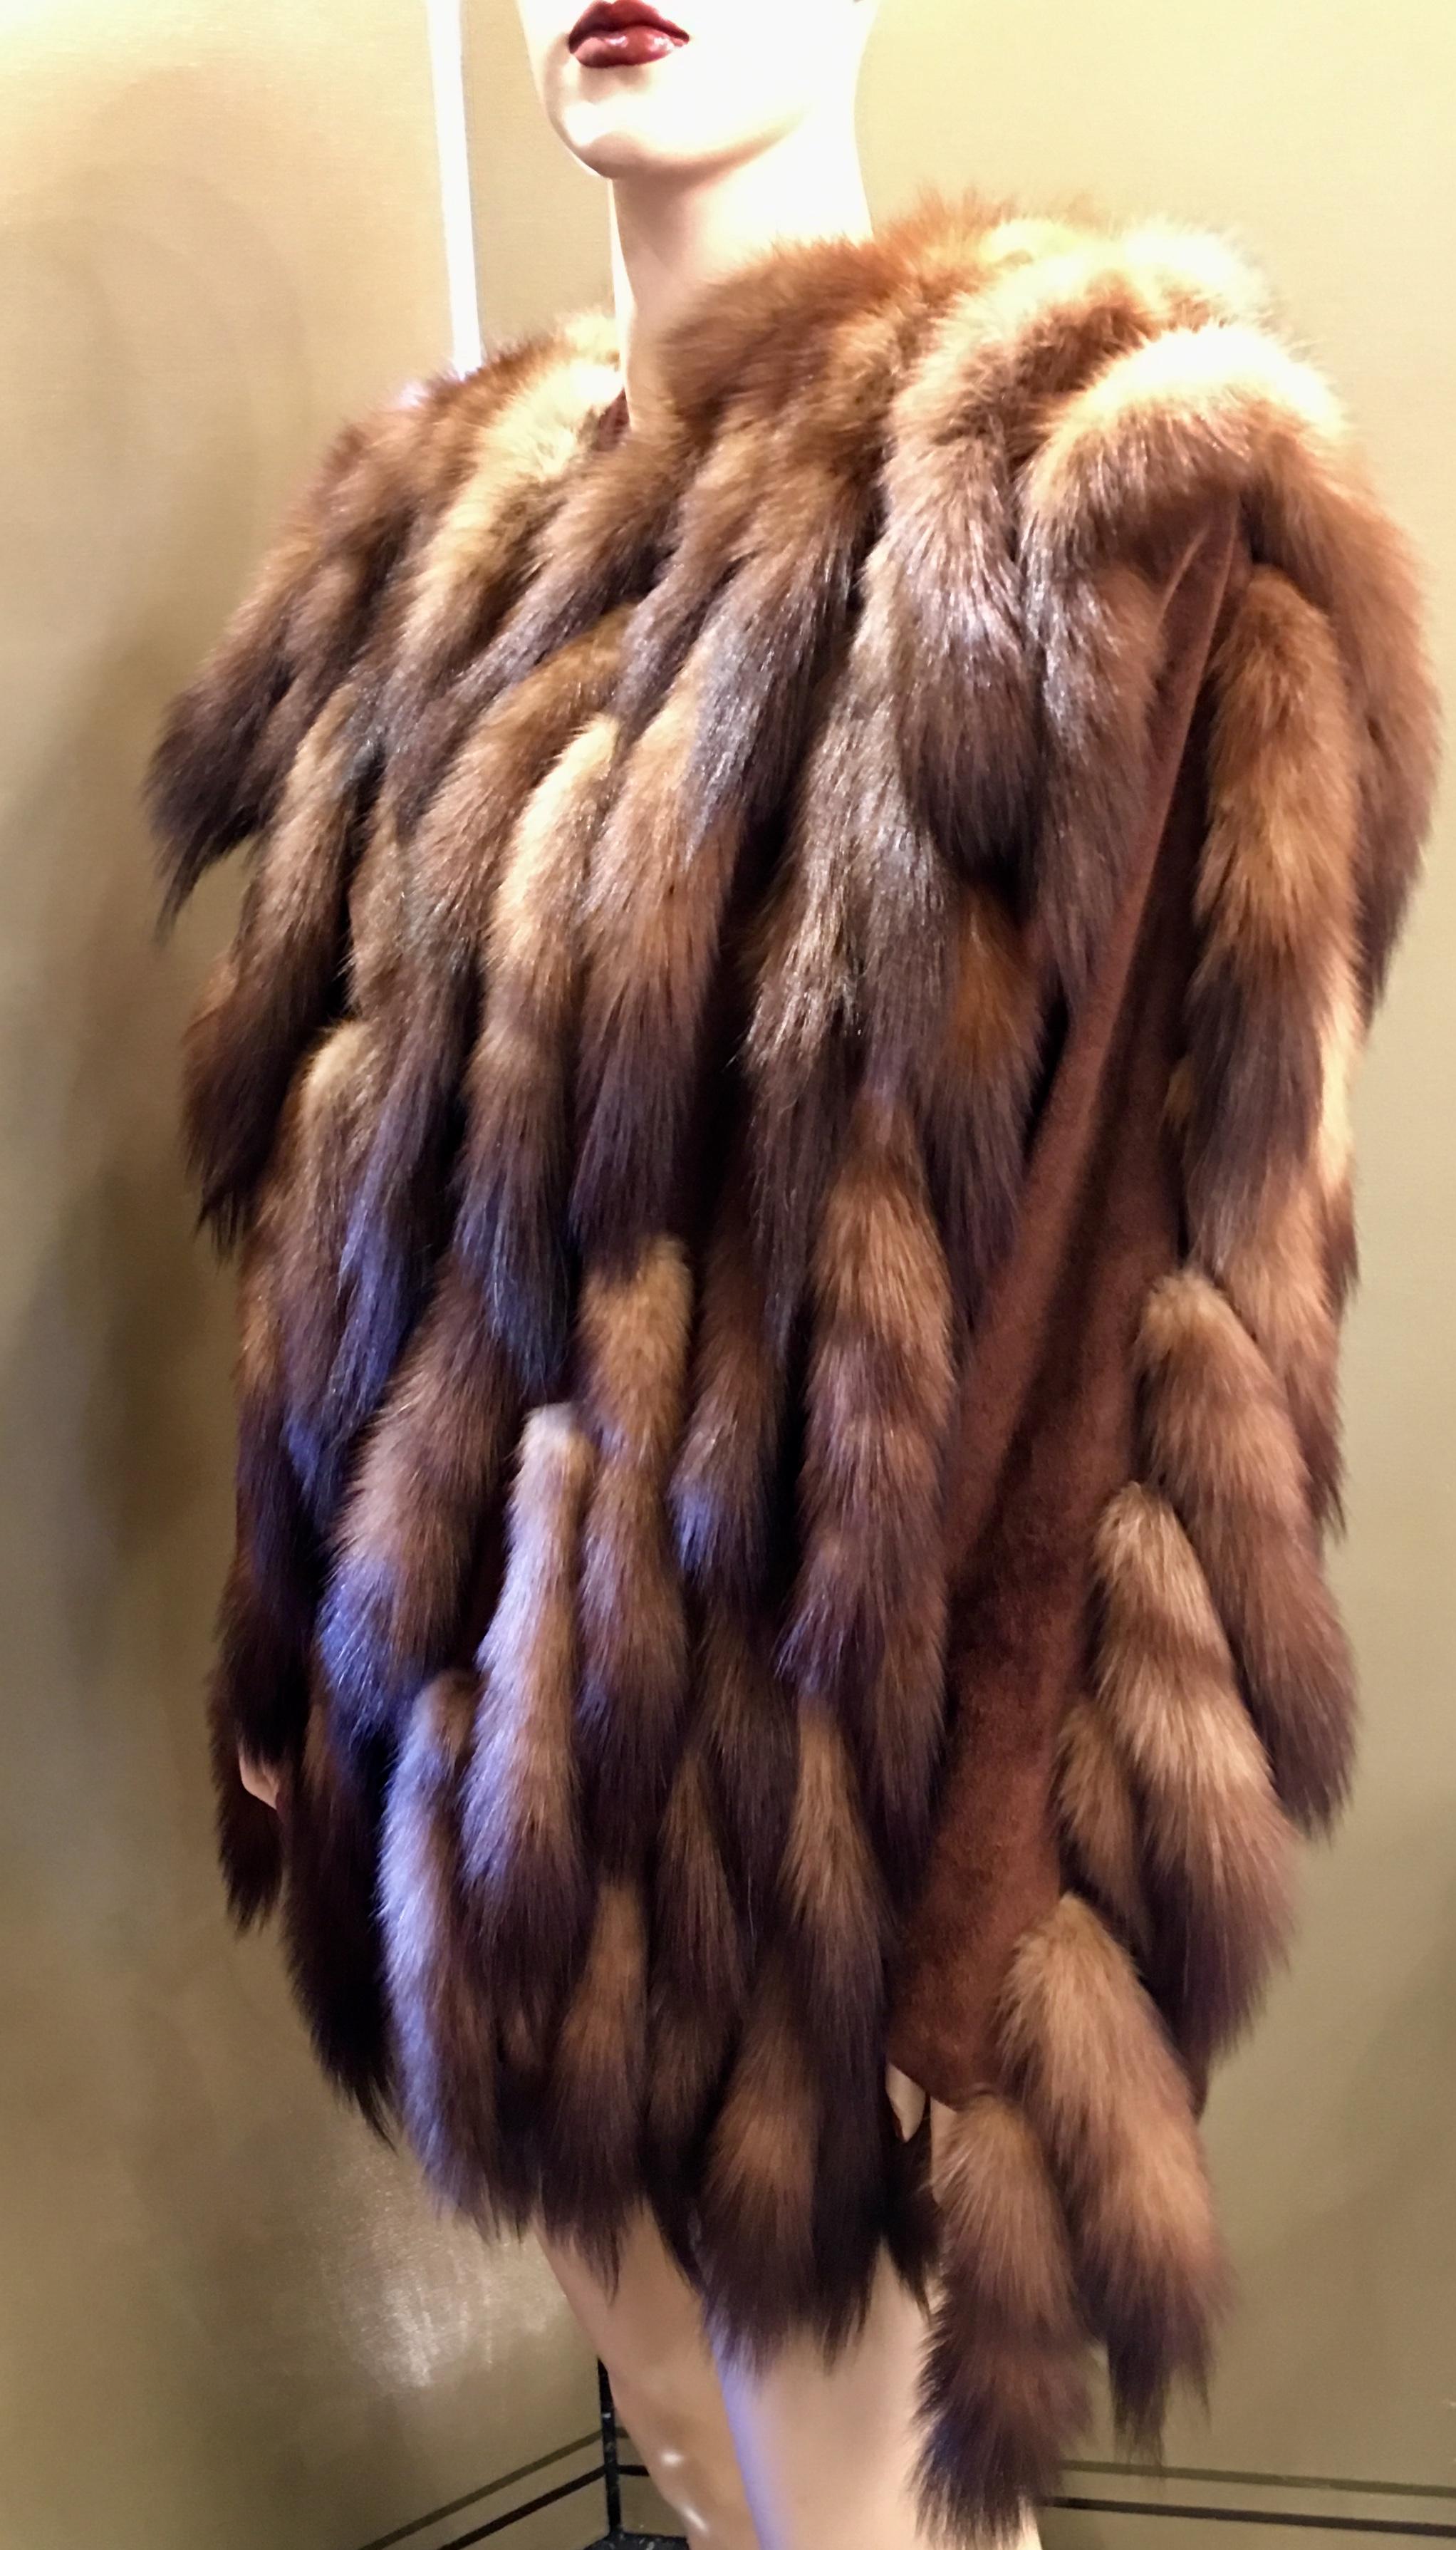 Fantastically styled, high fashion, brown suede jacket is covered in ultra soft Russian sable tails and is lined in cinnamon colored moire fabric with hook and eye closure.

The fur is in excellent condition.  The coat can fit a size small or